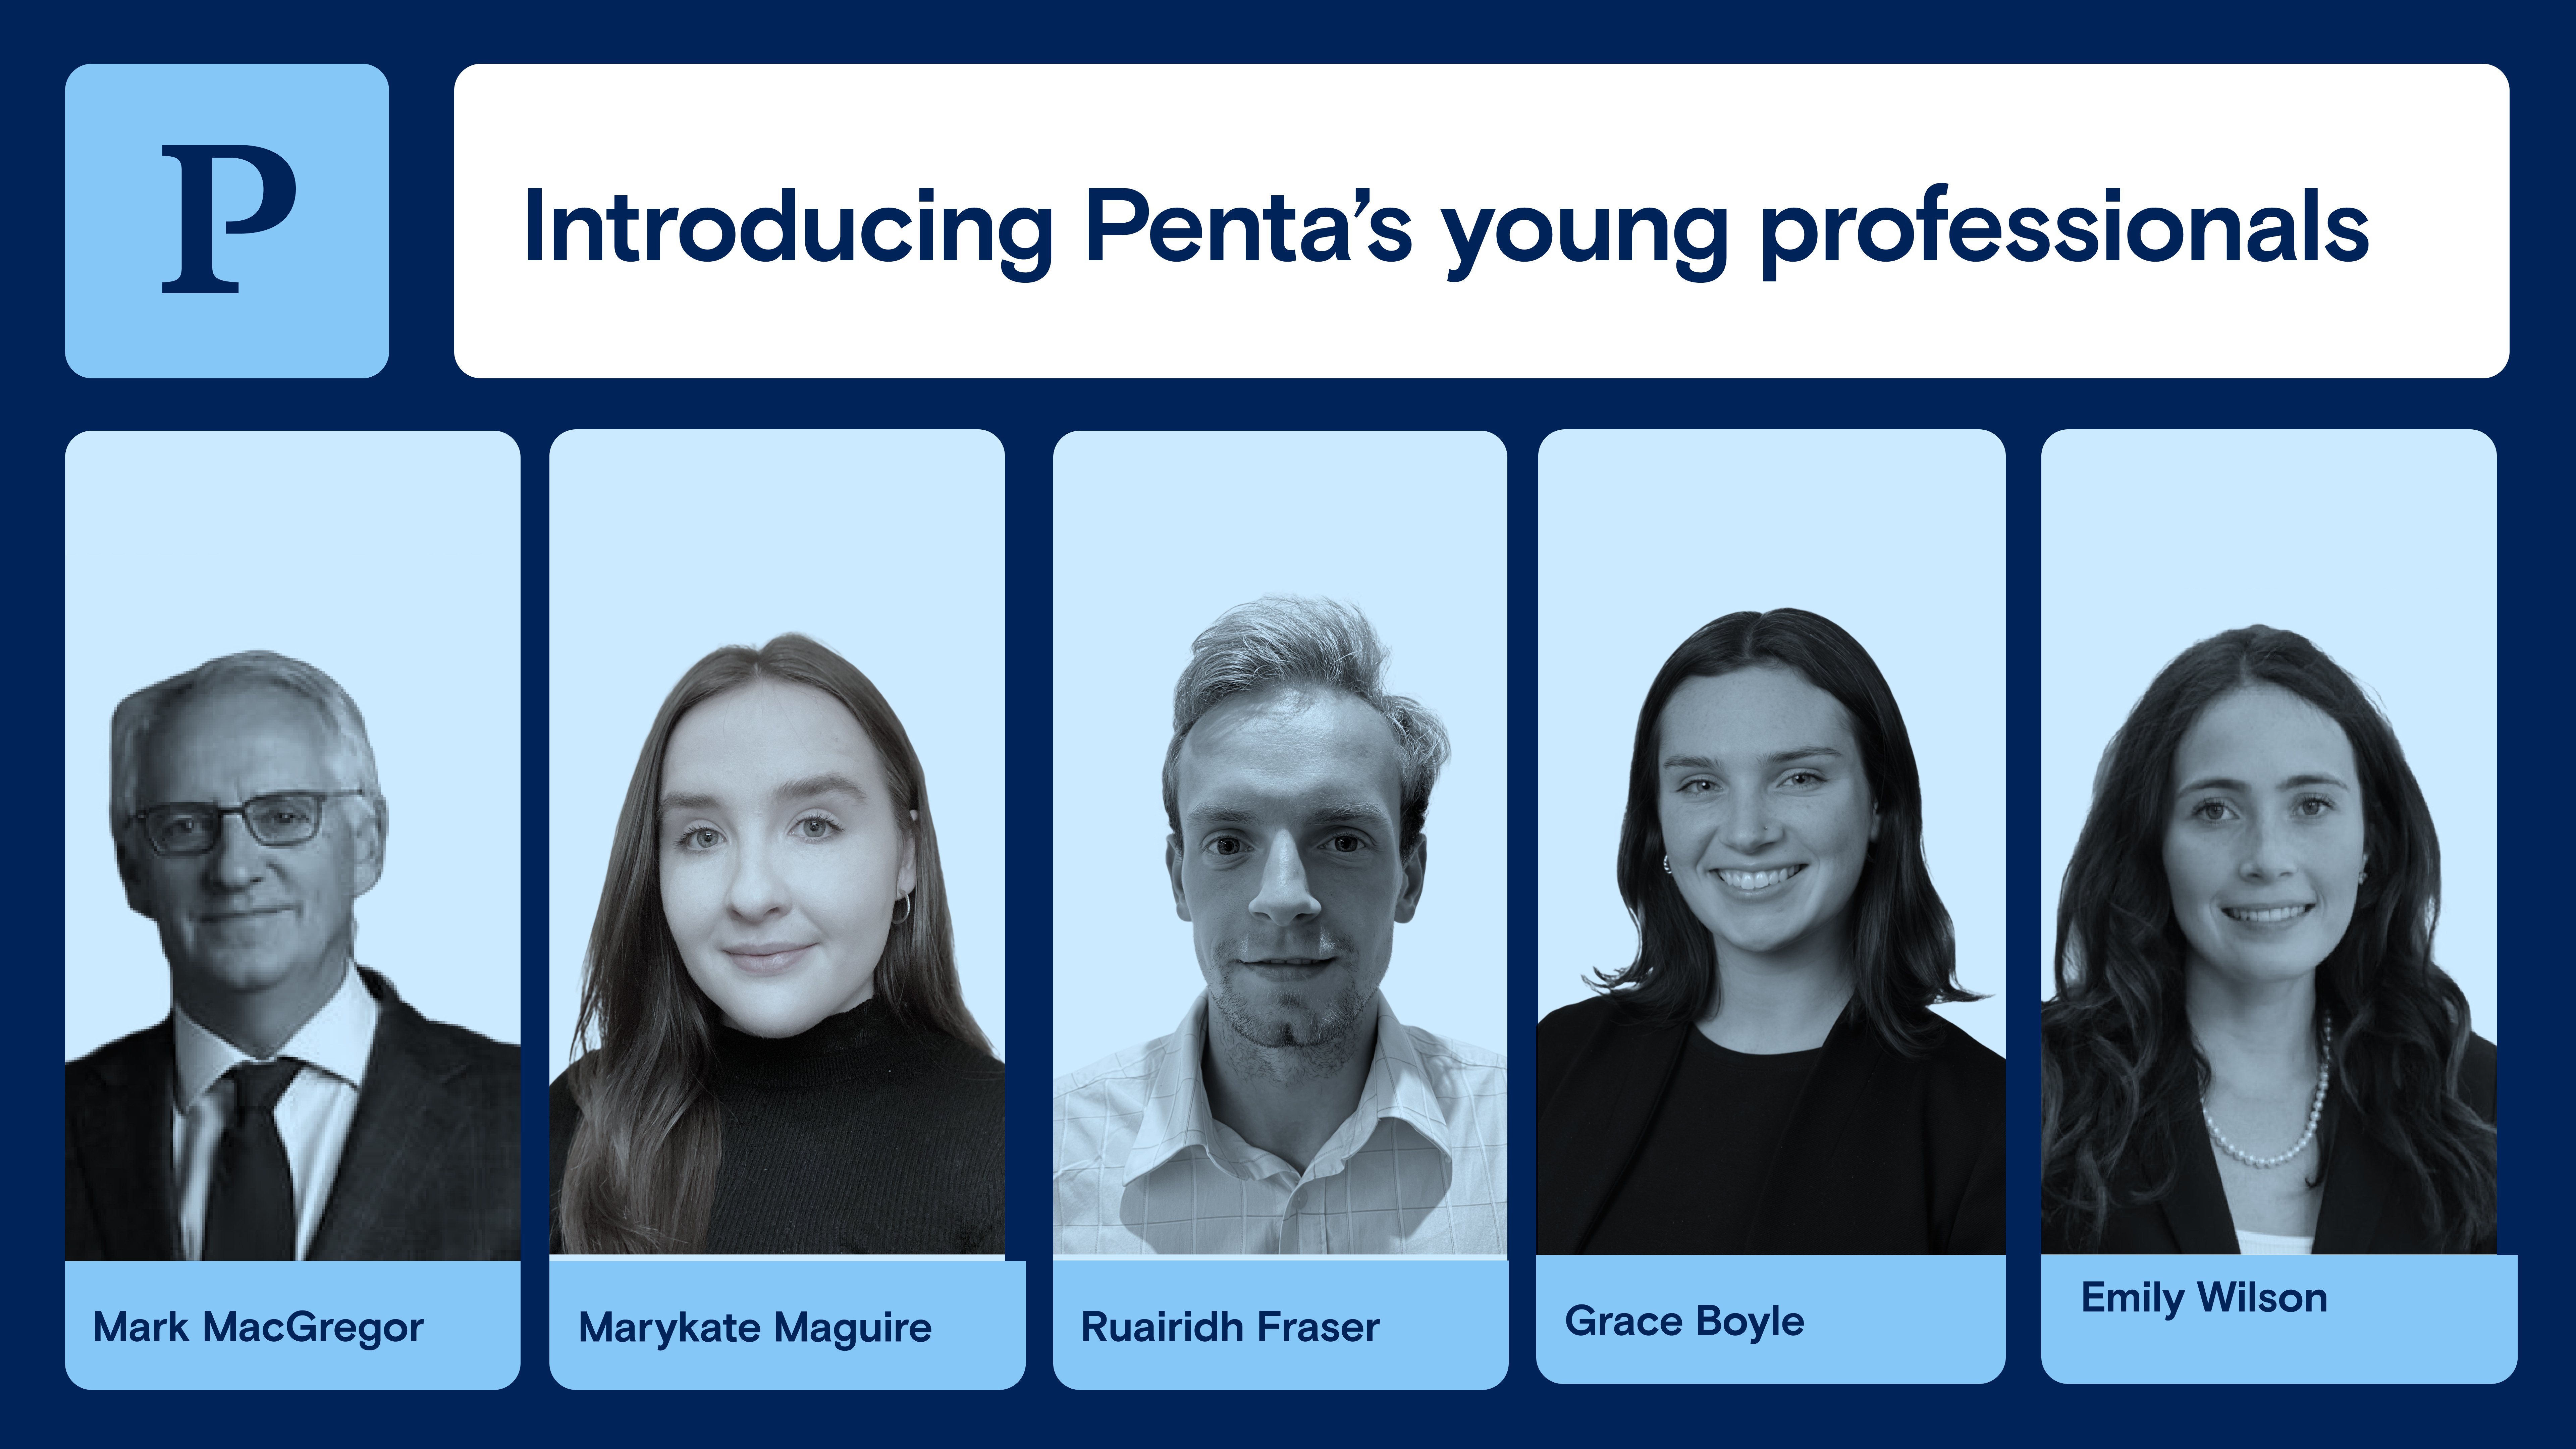 Introducing Penta's young professionals